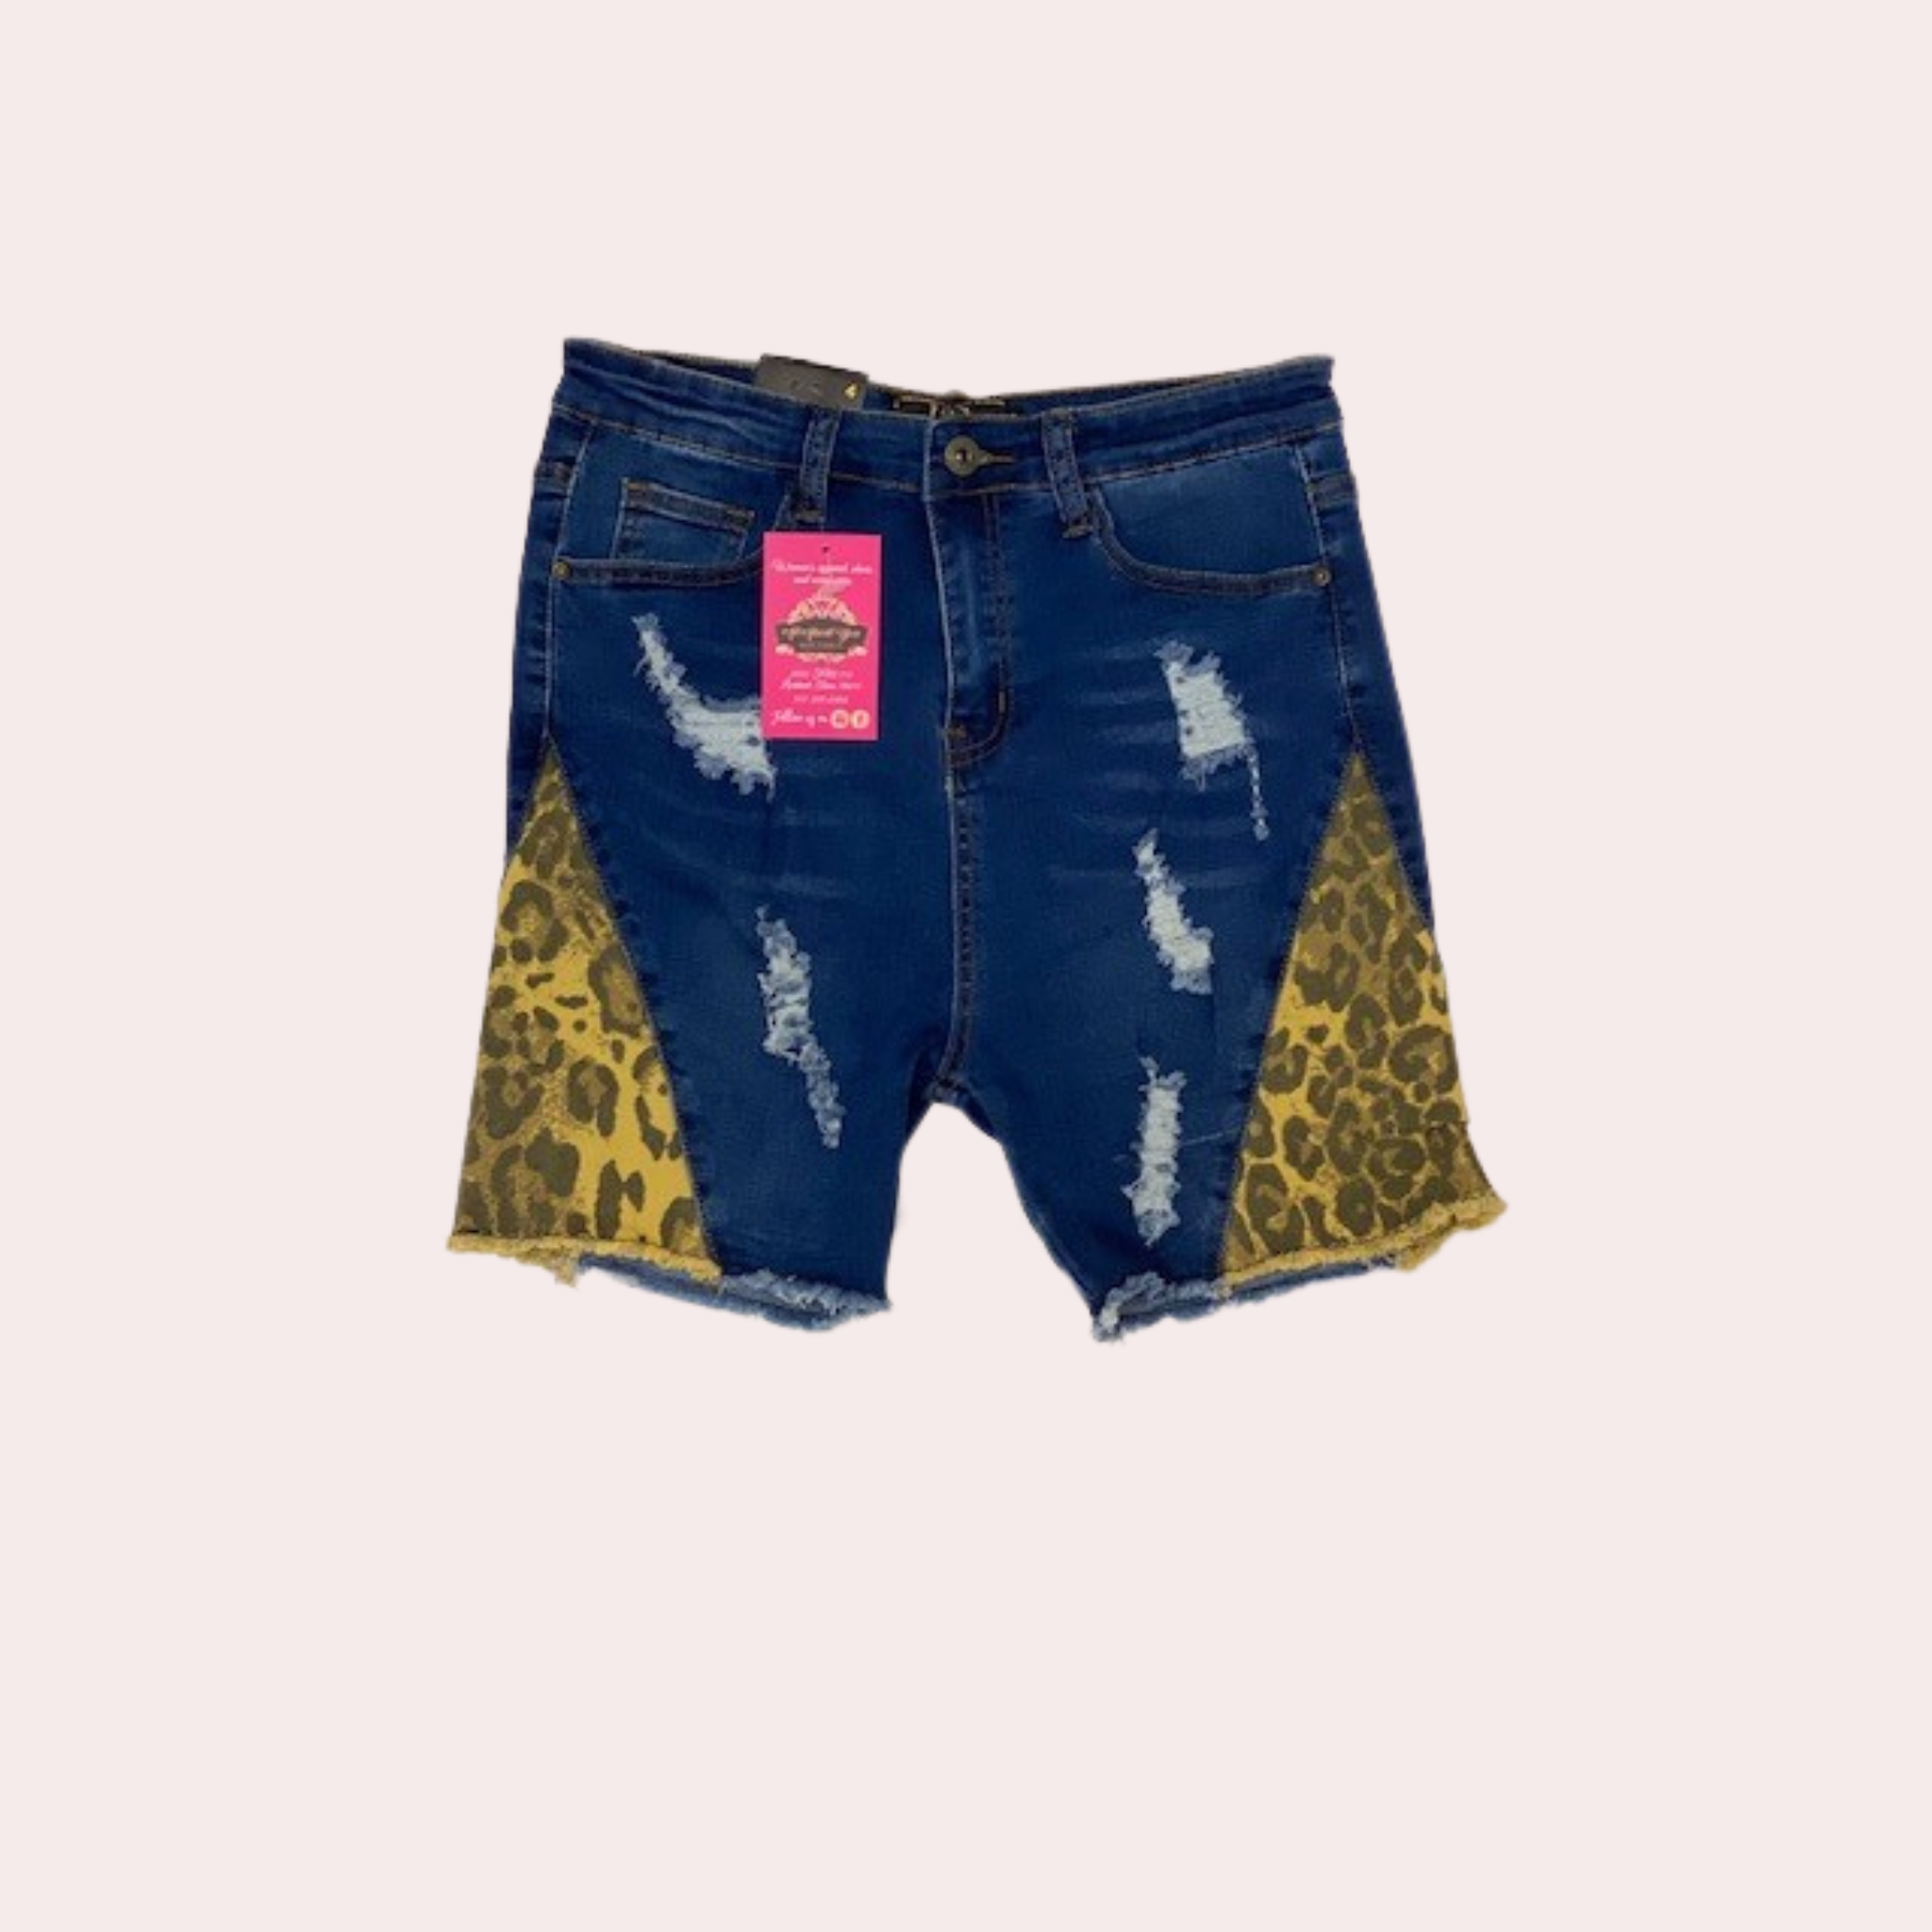 Denim shorts with leopard inserts